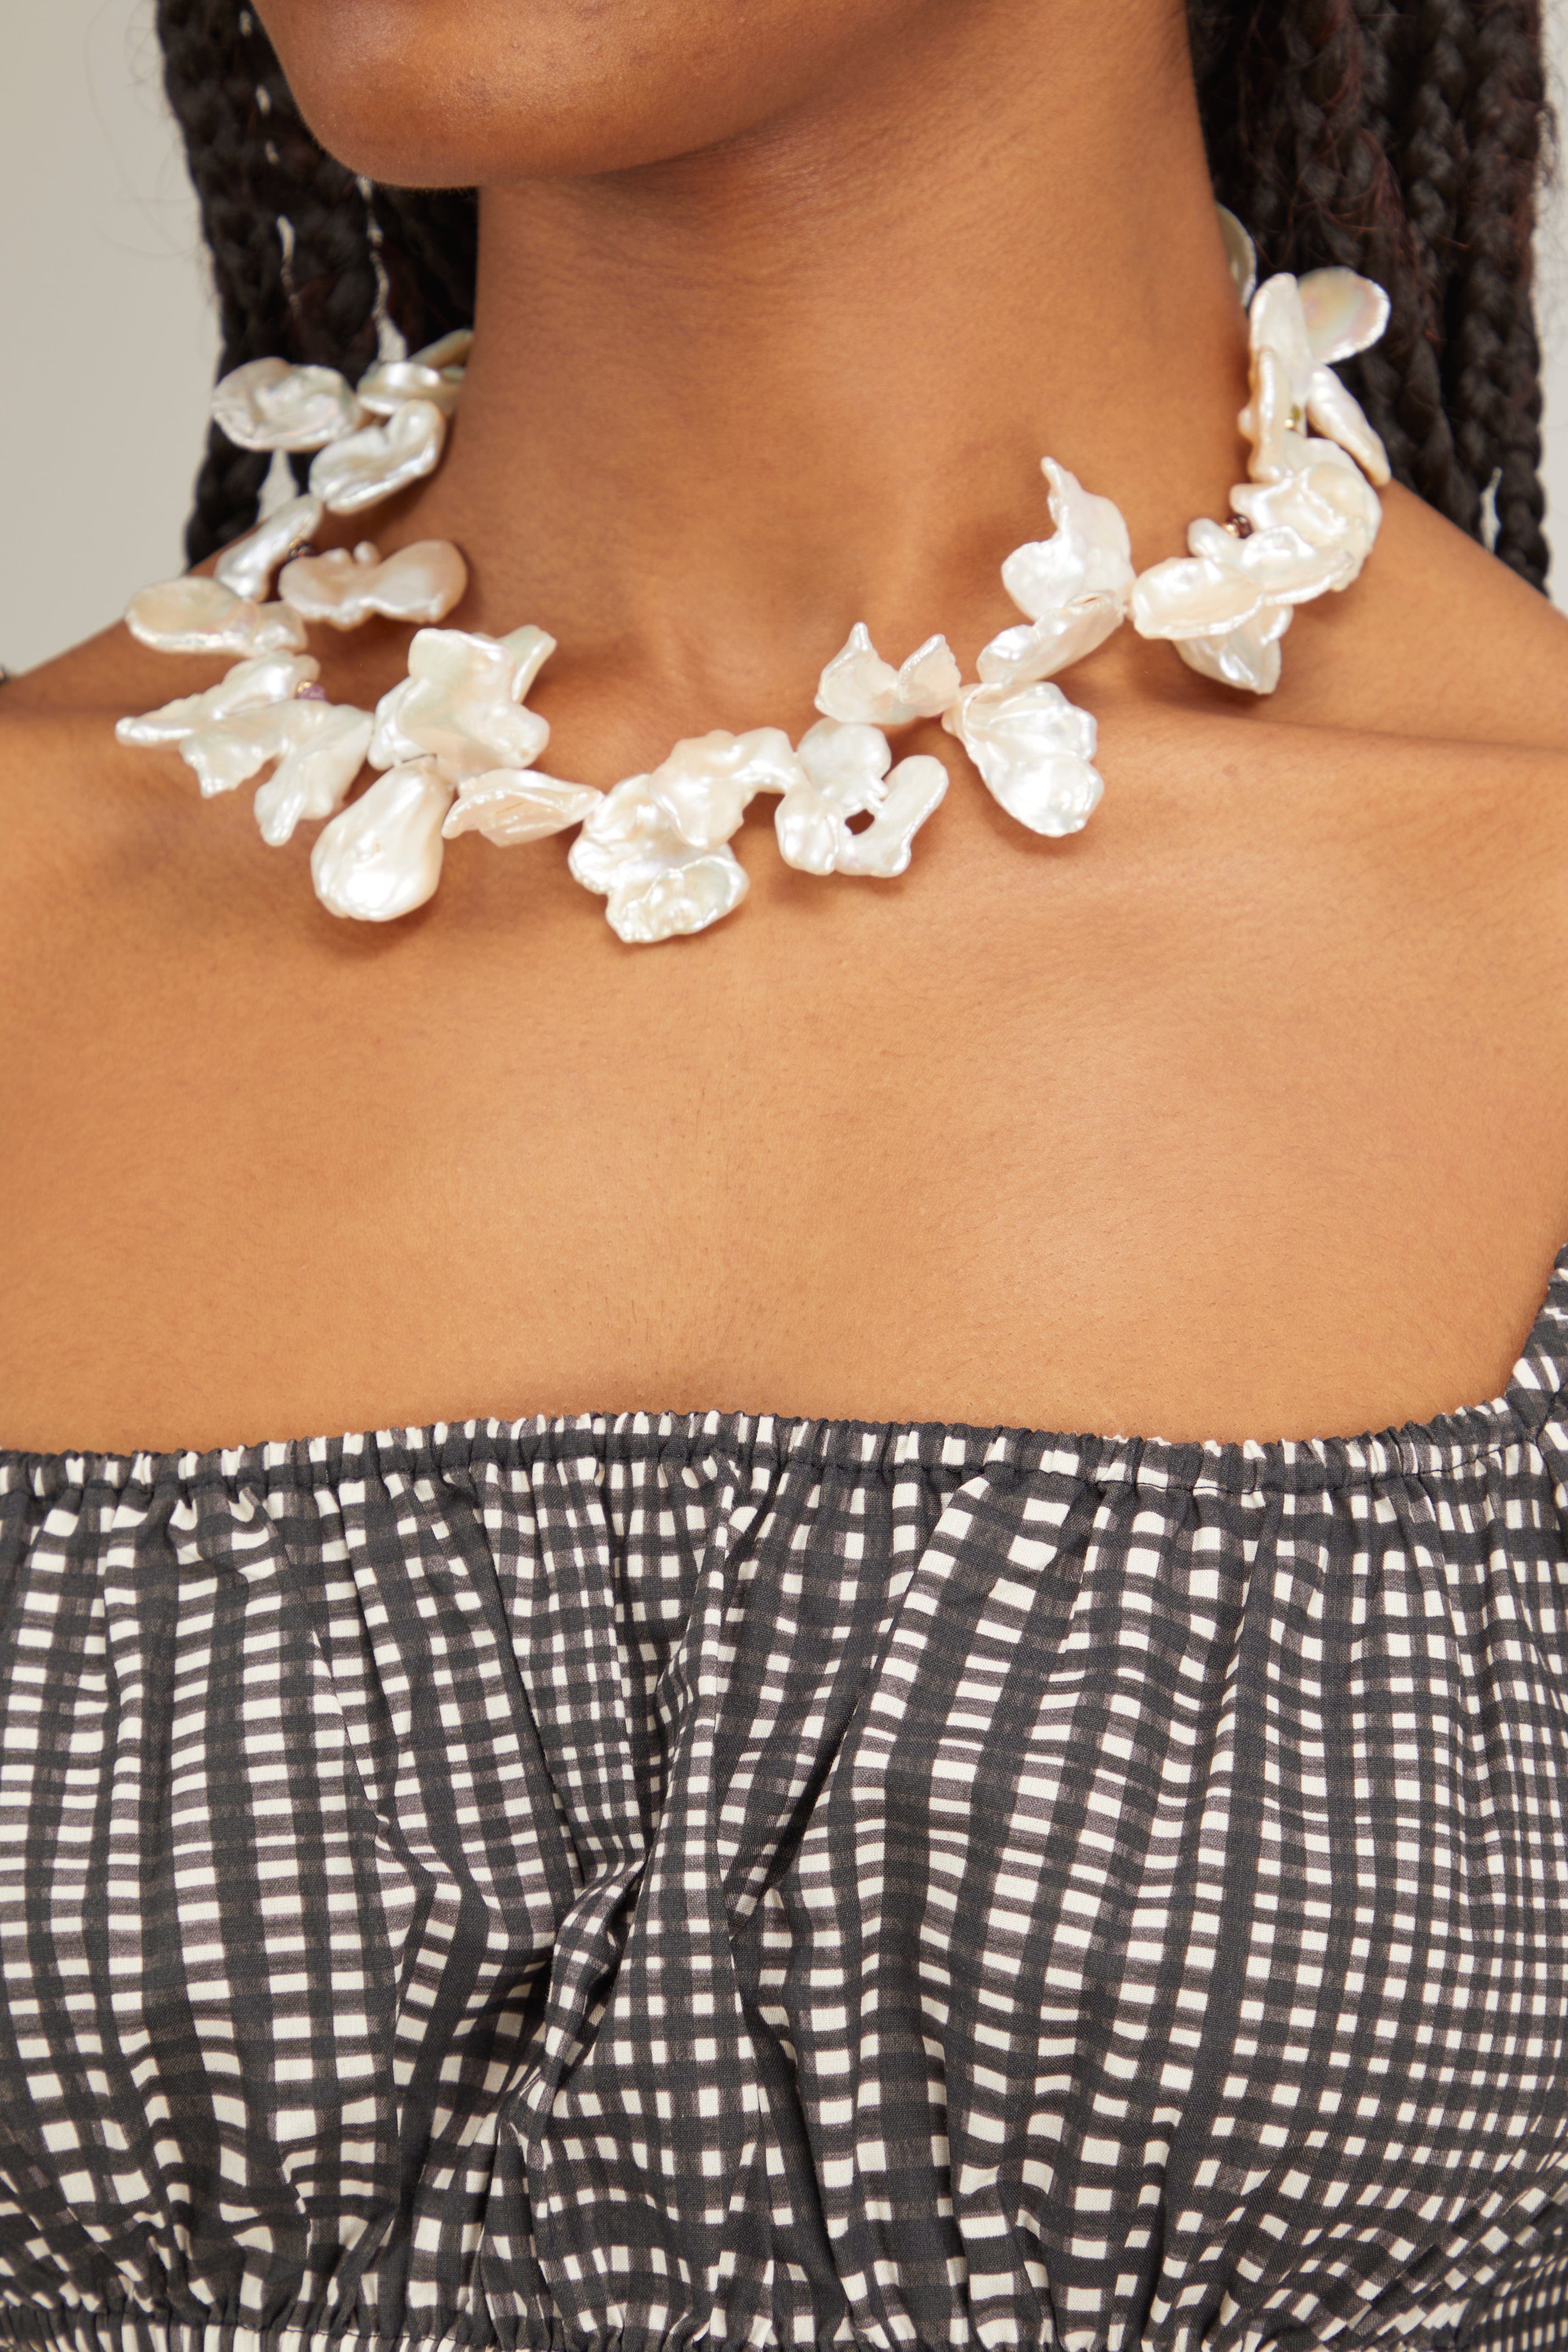 Lizzie Fortunato Necklaces Moonflower Necklace in White Lizzie Fortunato Moonflower Necklace in White